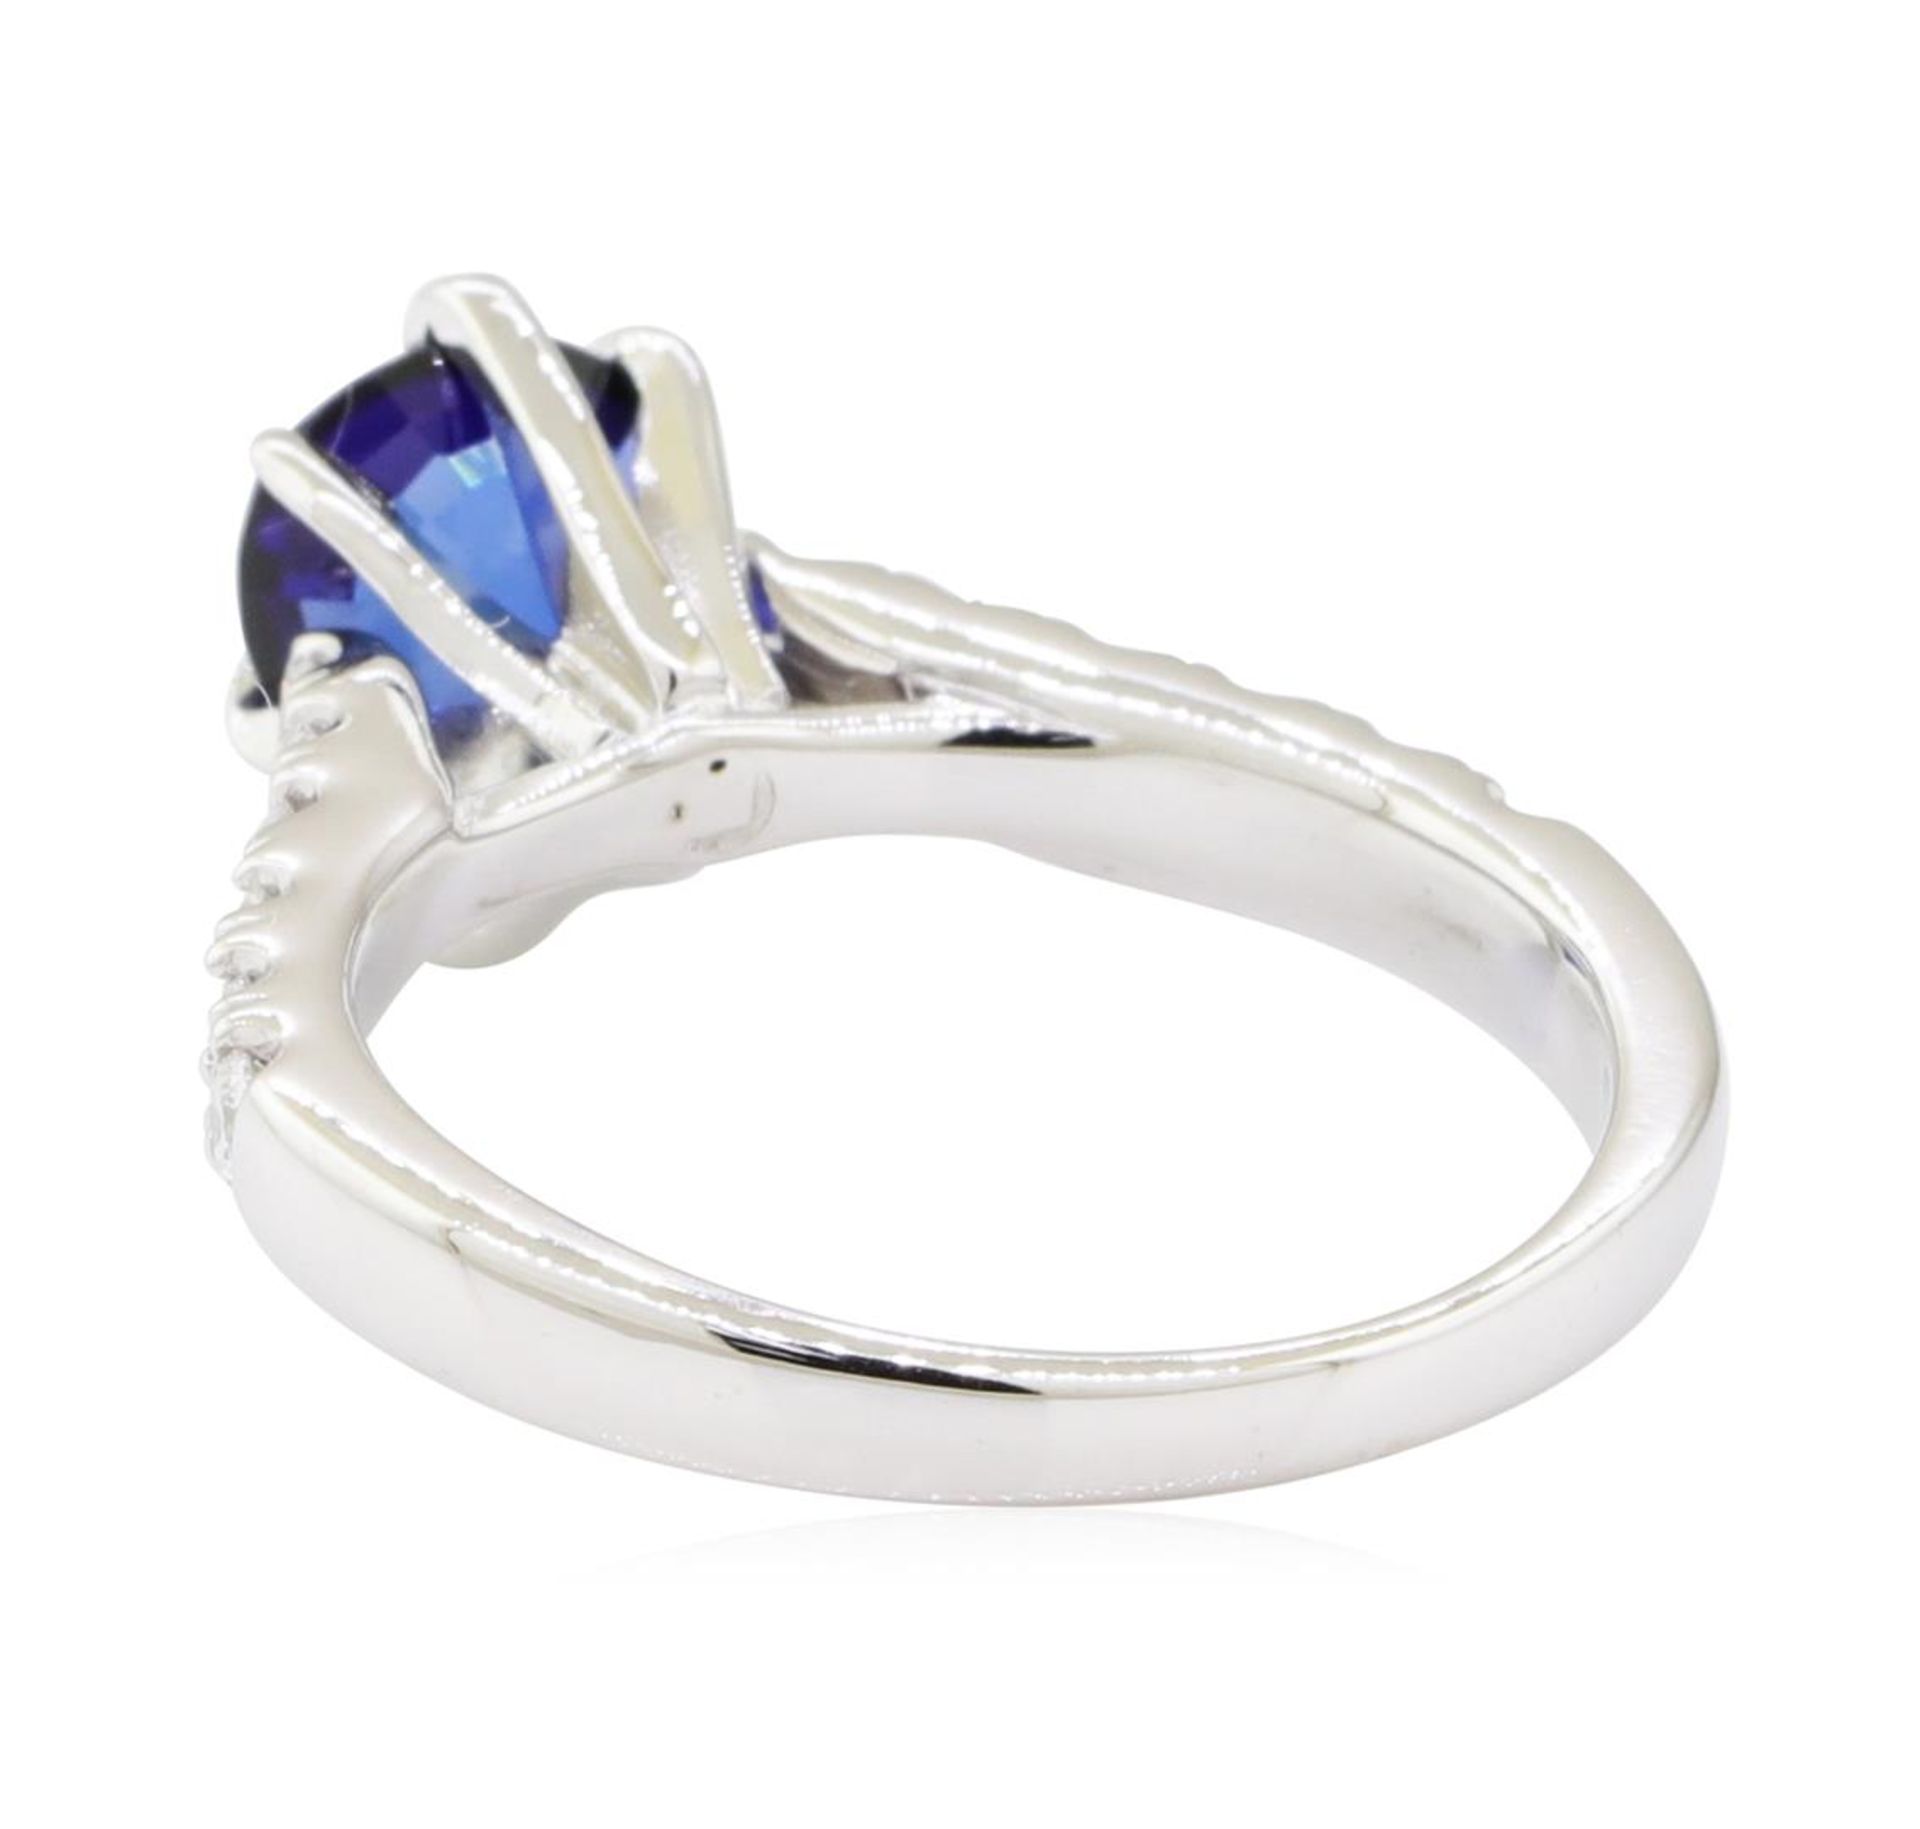 1.99 ctw Sapphire and Diamond Ring - 14KT White Gold - Image 3 of 5